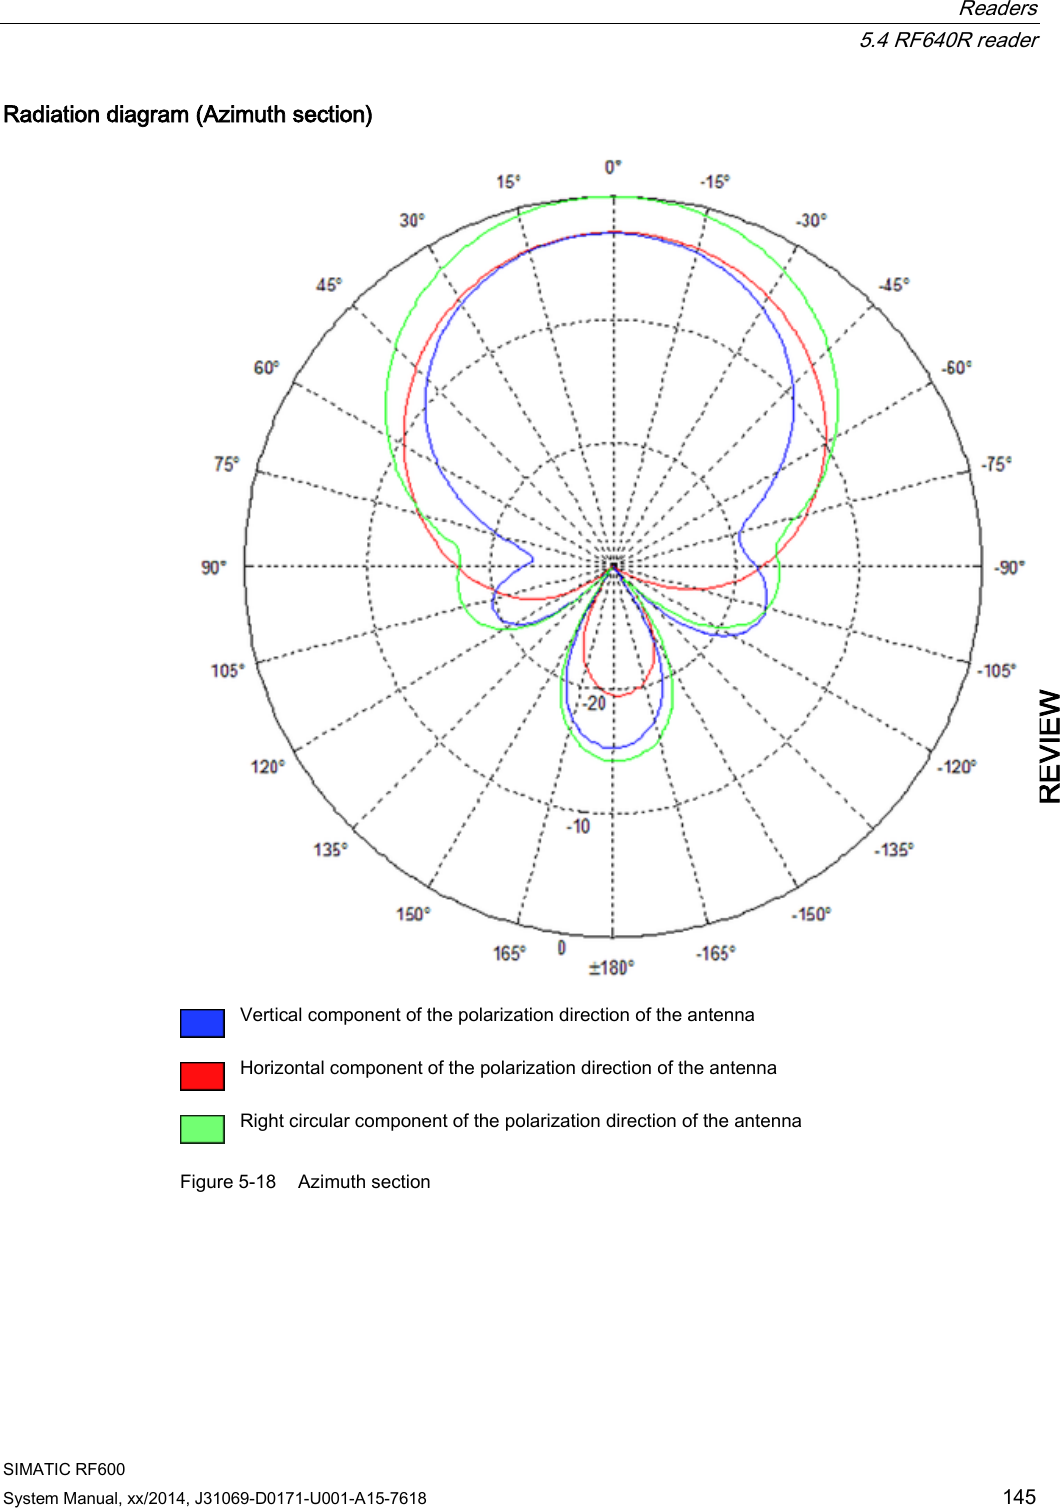  Readers  5.4 RF640R reader SIMATIC RF600 System Manual, xx/2014, J31069-D0171-U001-A15-7618 145 REVIEW Radiation diagram (Azimuth section)   Vertical component of the polarization direction of the antenna  Horizontal component of the polarization direction of the antenna  Right circular component of the polarization direction of the antenna Figure 5-18 Azimuth section 